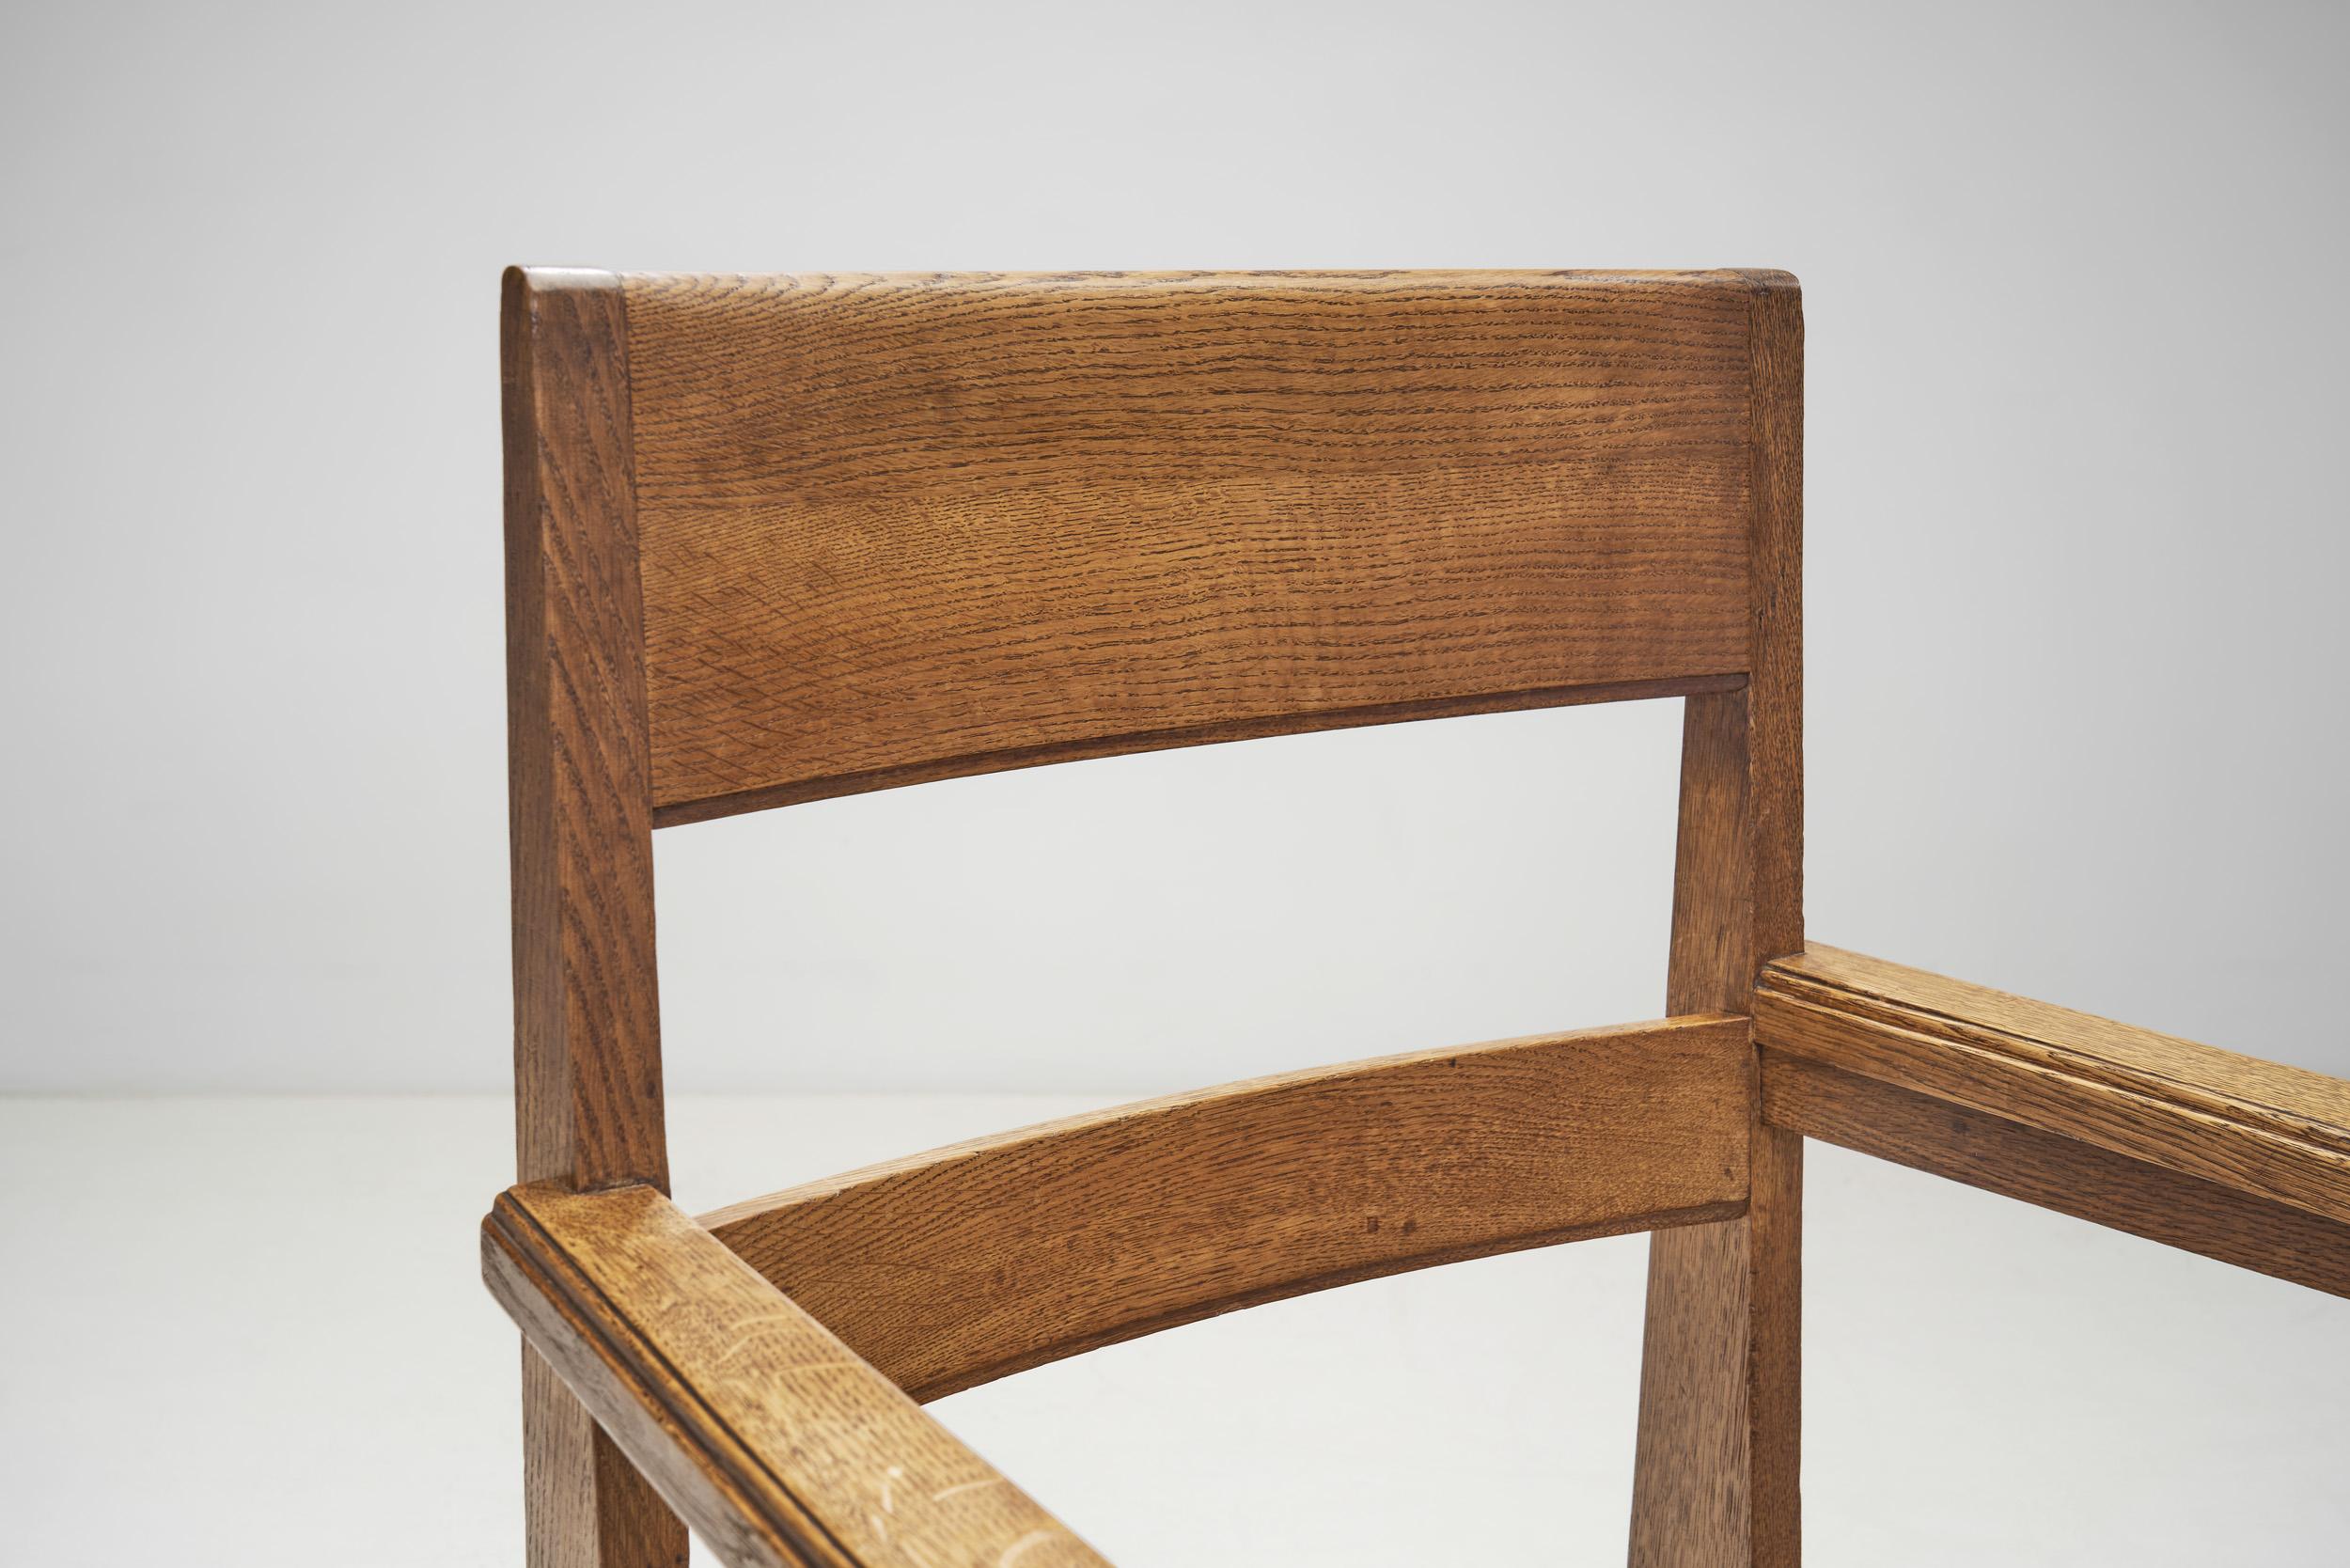 Dutch Oak Art Deco Chairs with Rush Seats, The Netherlands 1920s For Sale 2